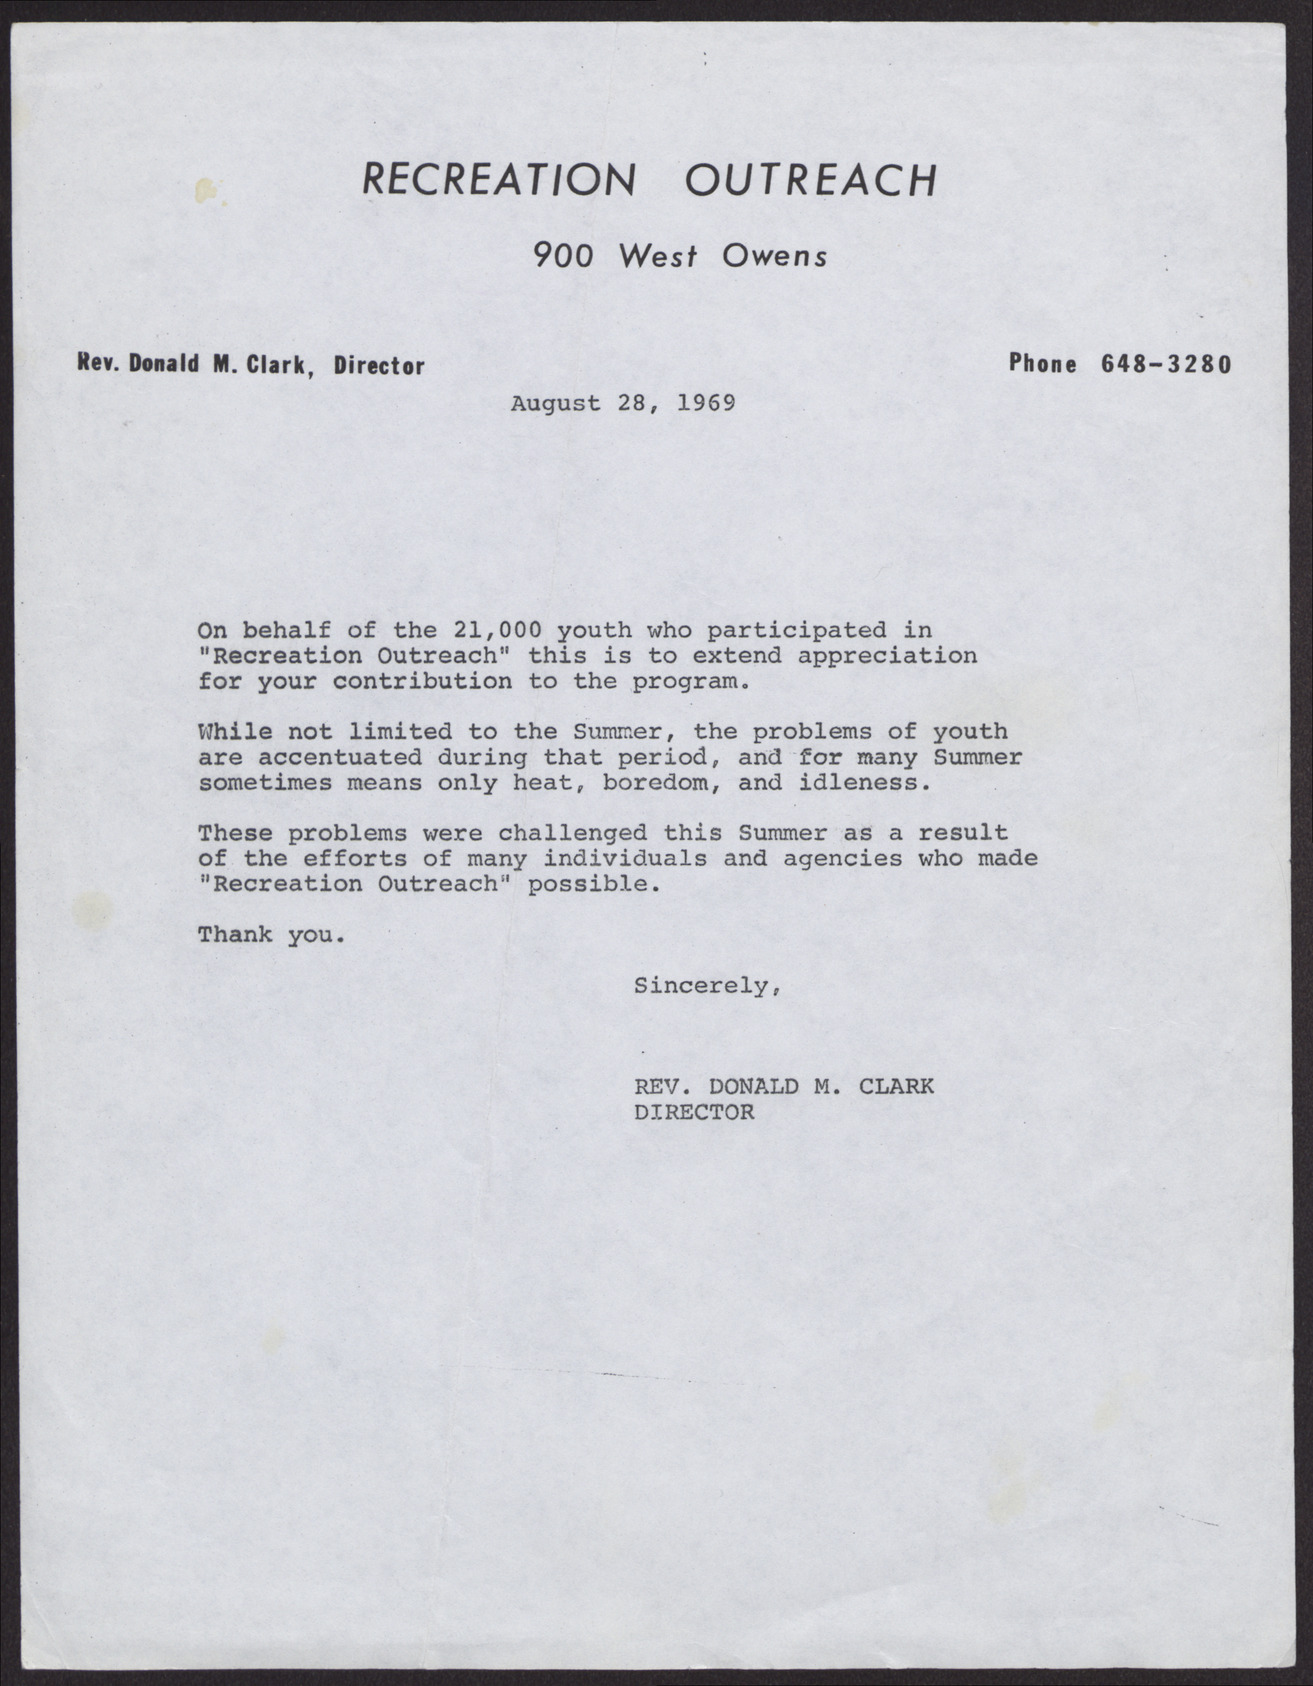 Thank you letter from Rev. Donald M. Clark on behalf of Recreation Outreach, August 28, 1969